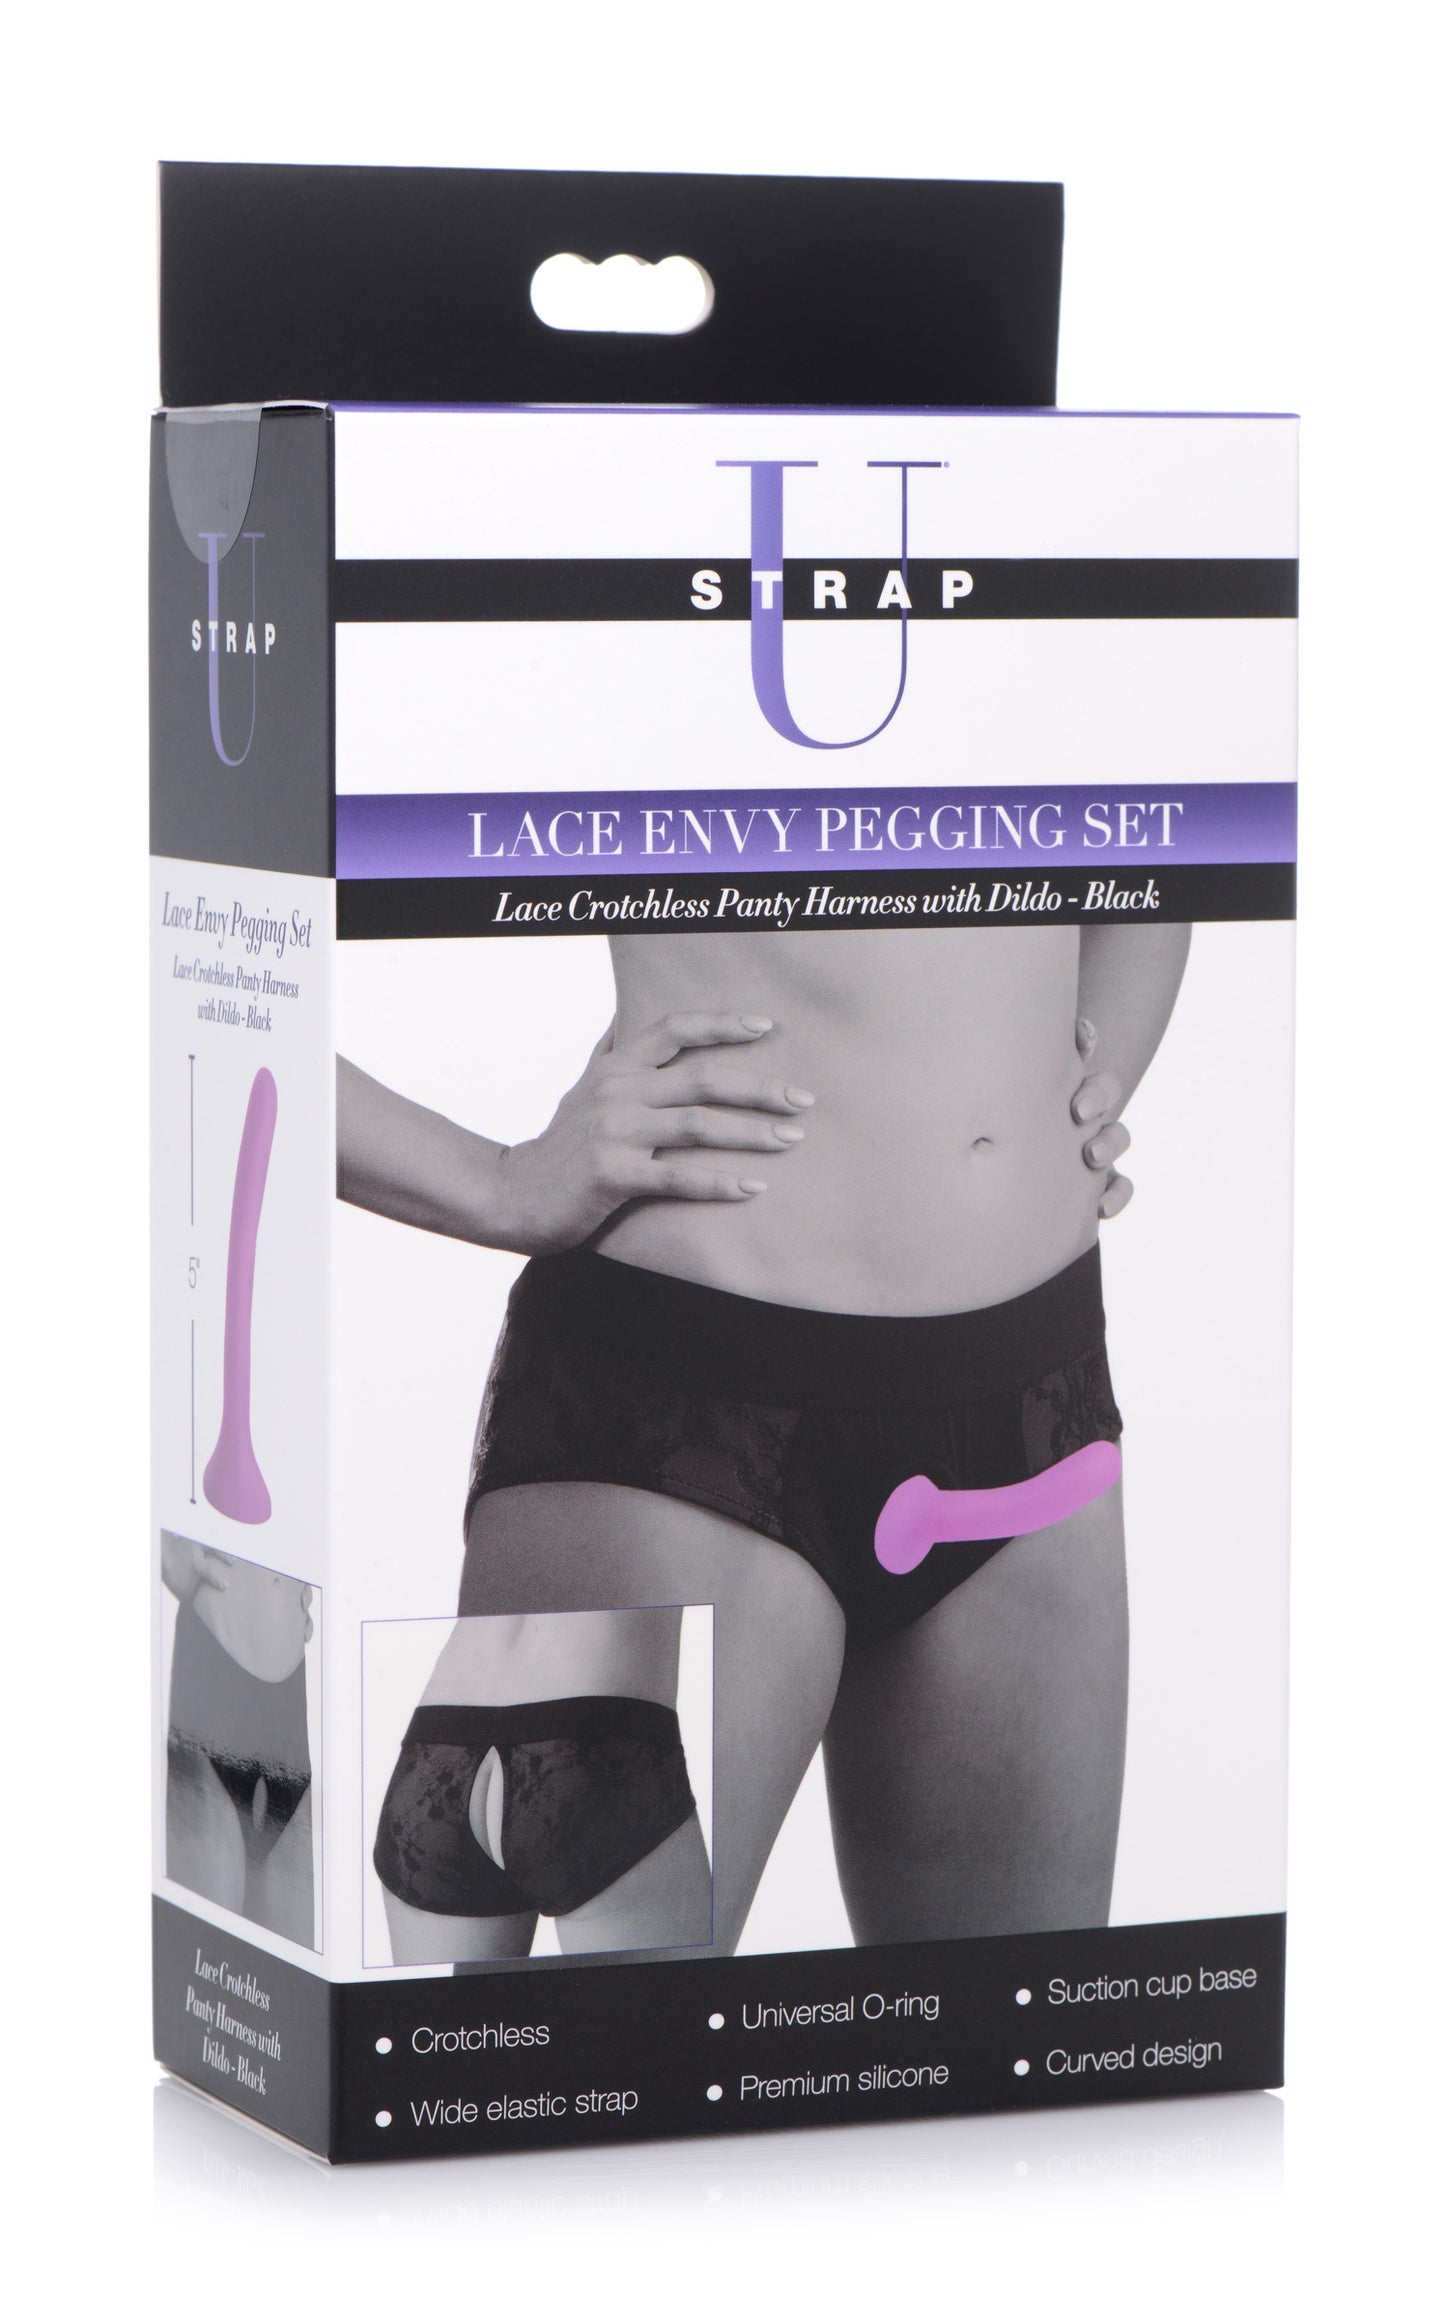 Lace Envy Black Pegging Set with Lace Crotchless Panty Harness and Dildo - L-XL